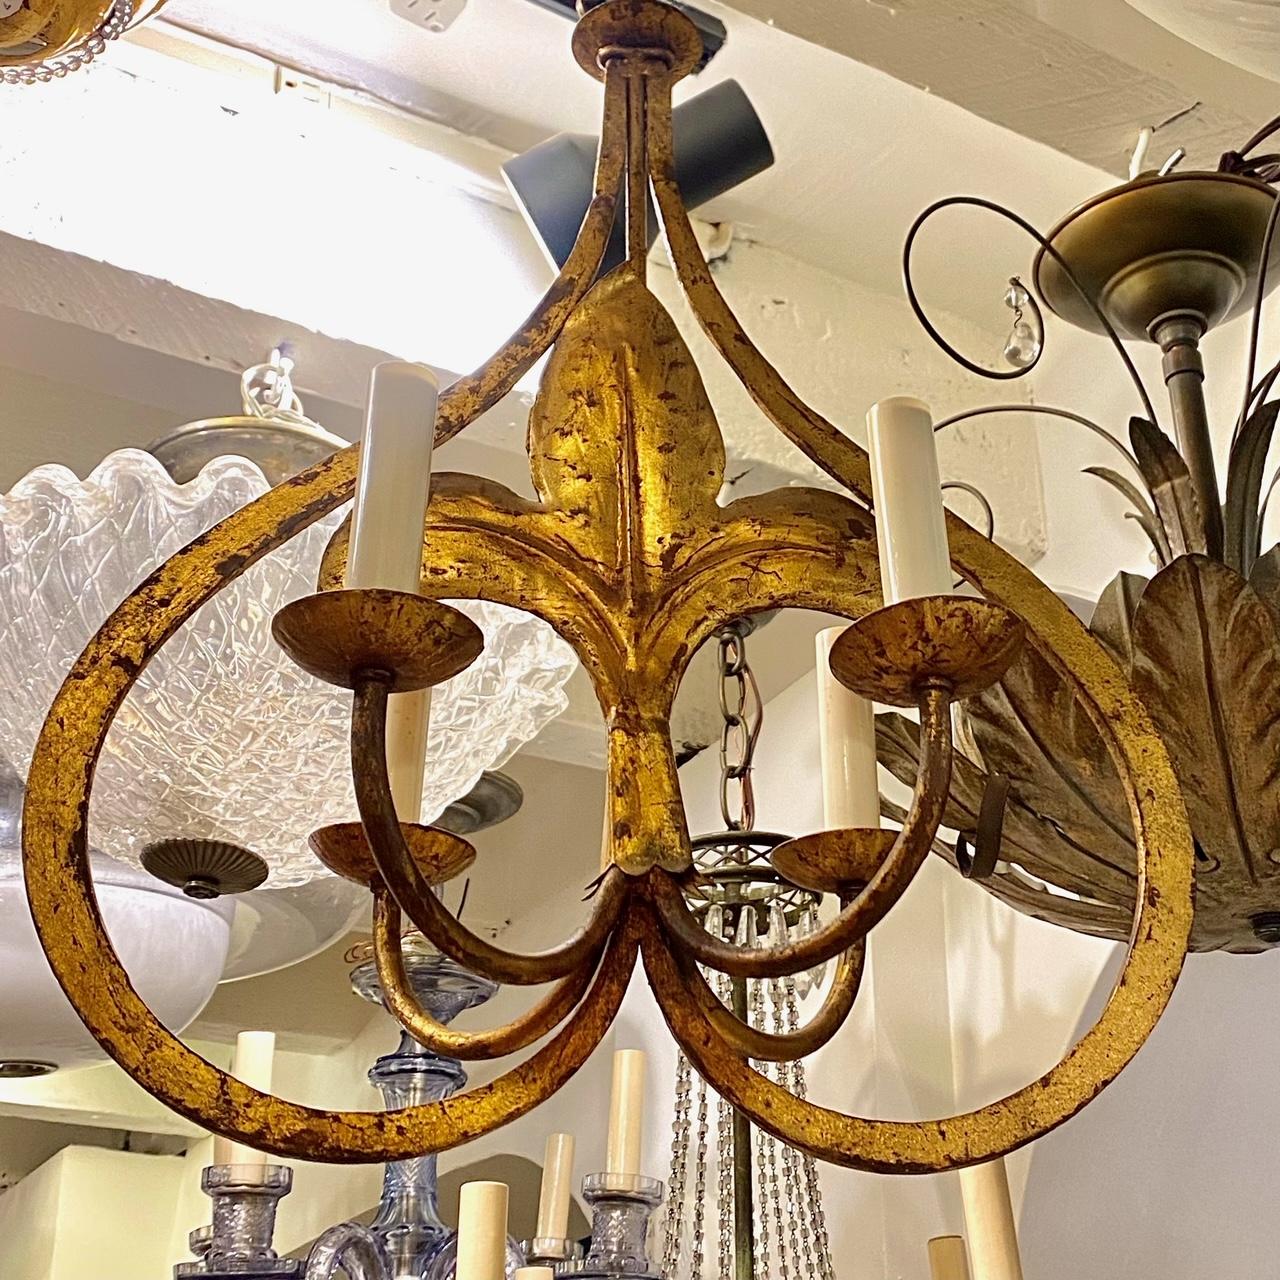 A set of three circa 1940's French gilt metal chandeliers with fleur-de-lys motif and four lights. Sold individually.

Measurements:
Height: 23.5